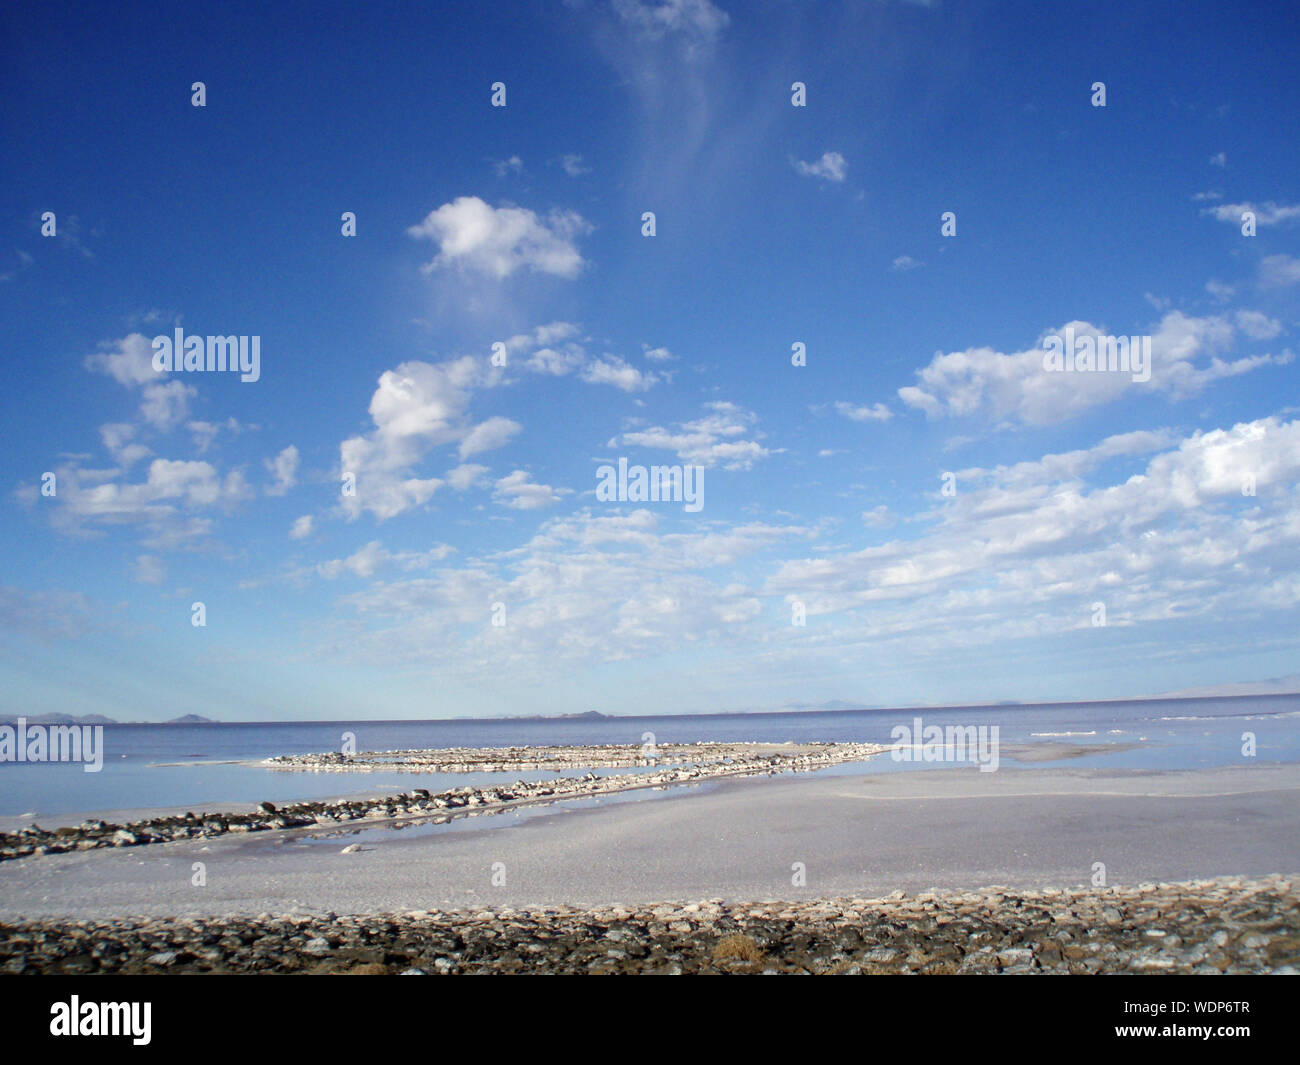 Utah - August 22, 2007: Spiral jetty and sky seen from the rocky shore, Robert Smithson's masterpiece earthwork, on the north side of the Great Salt L Stock Photo